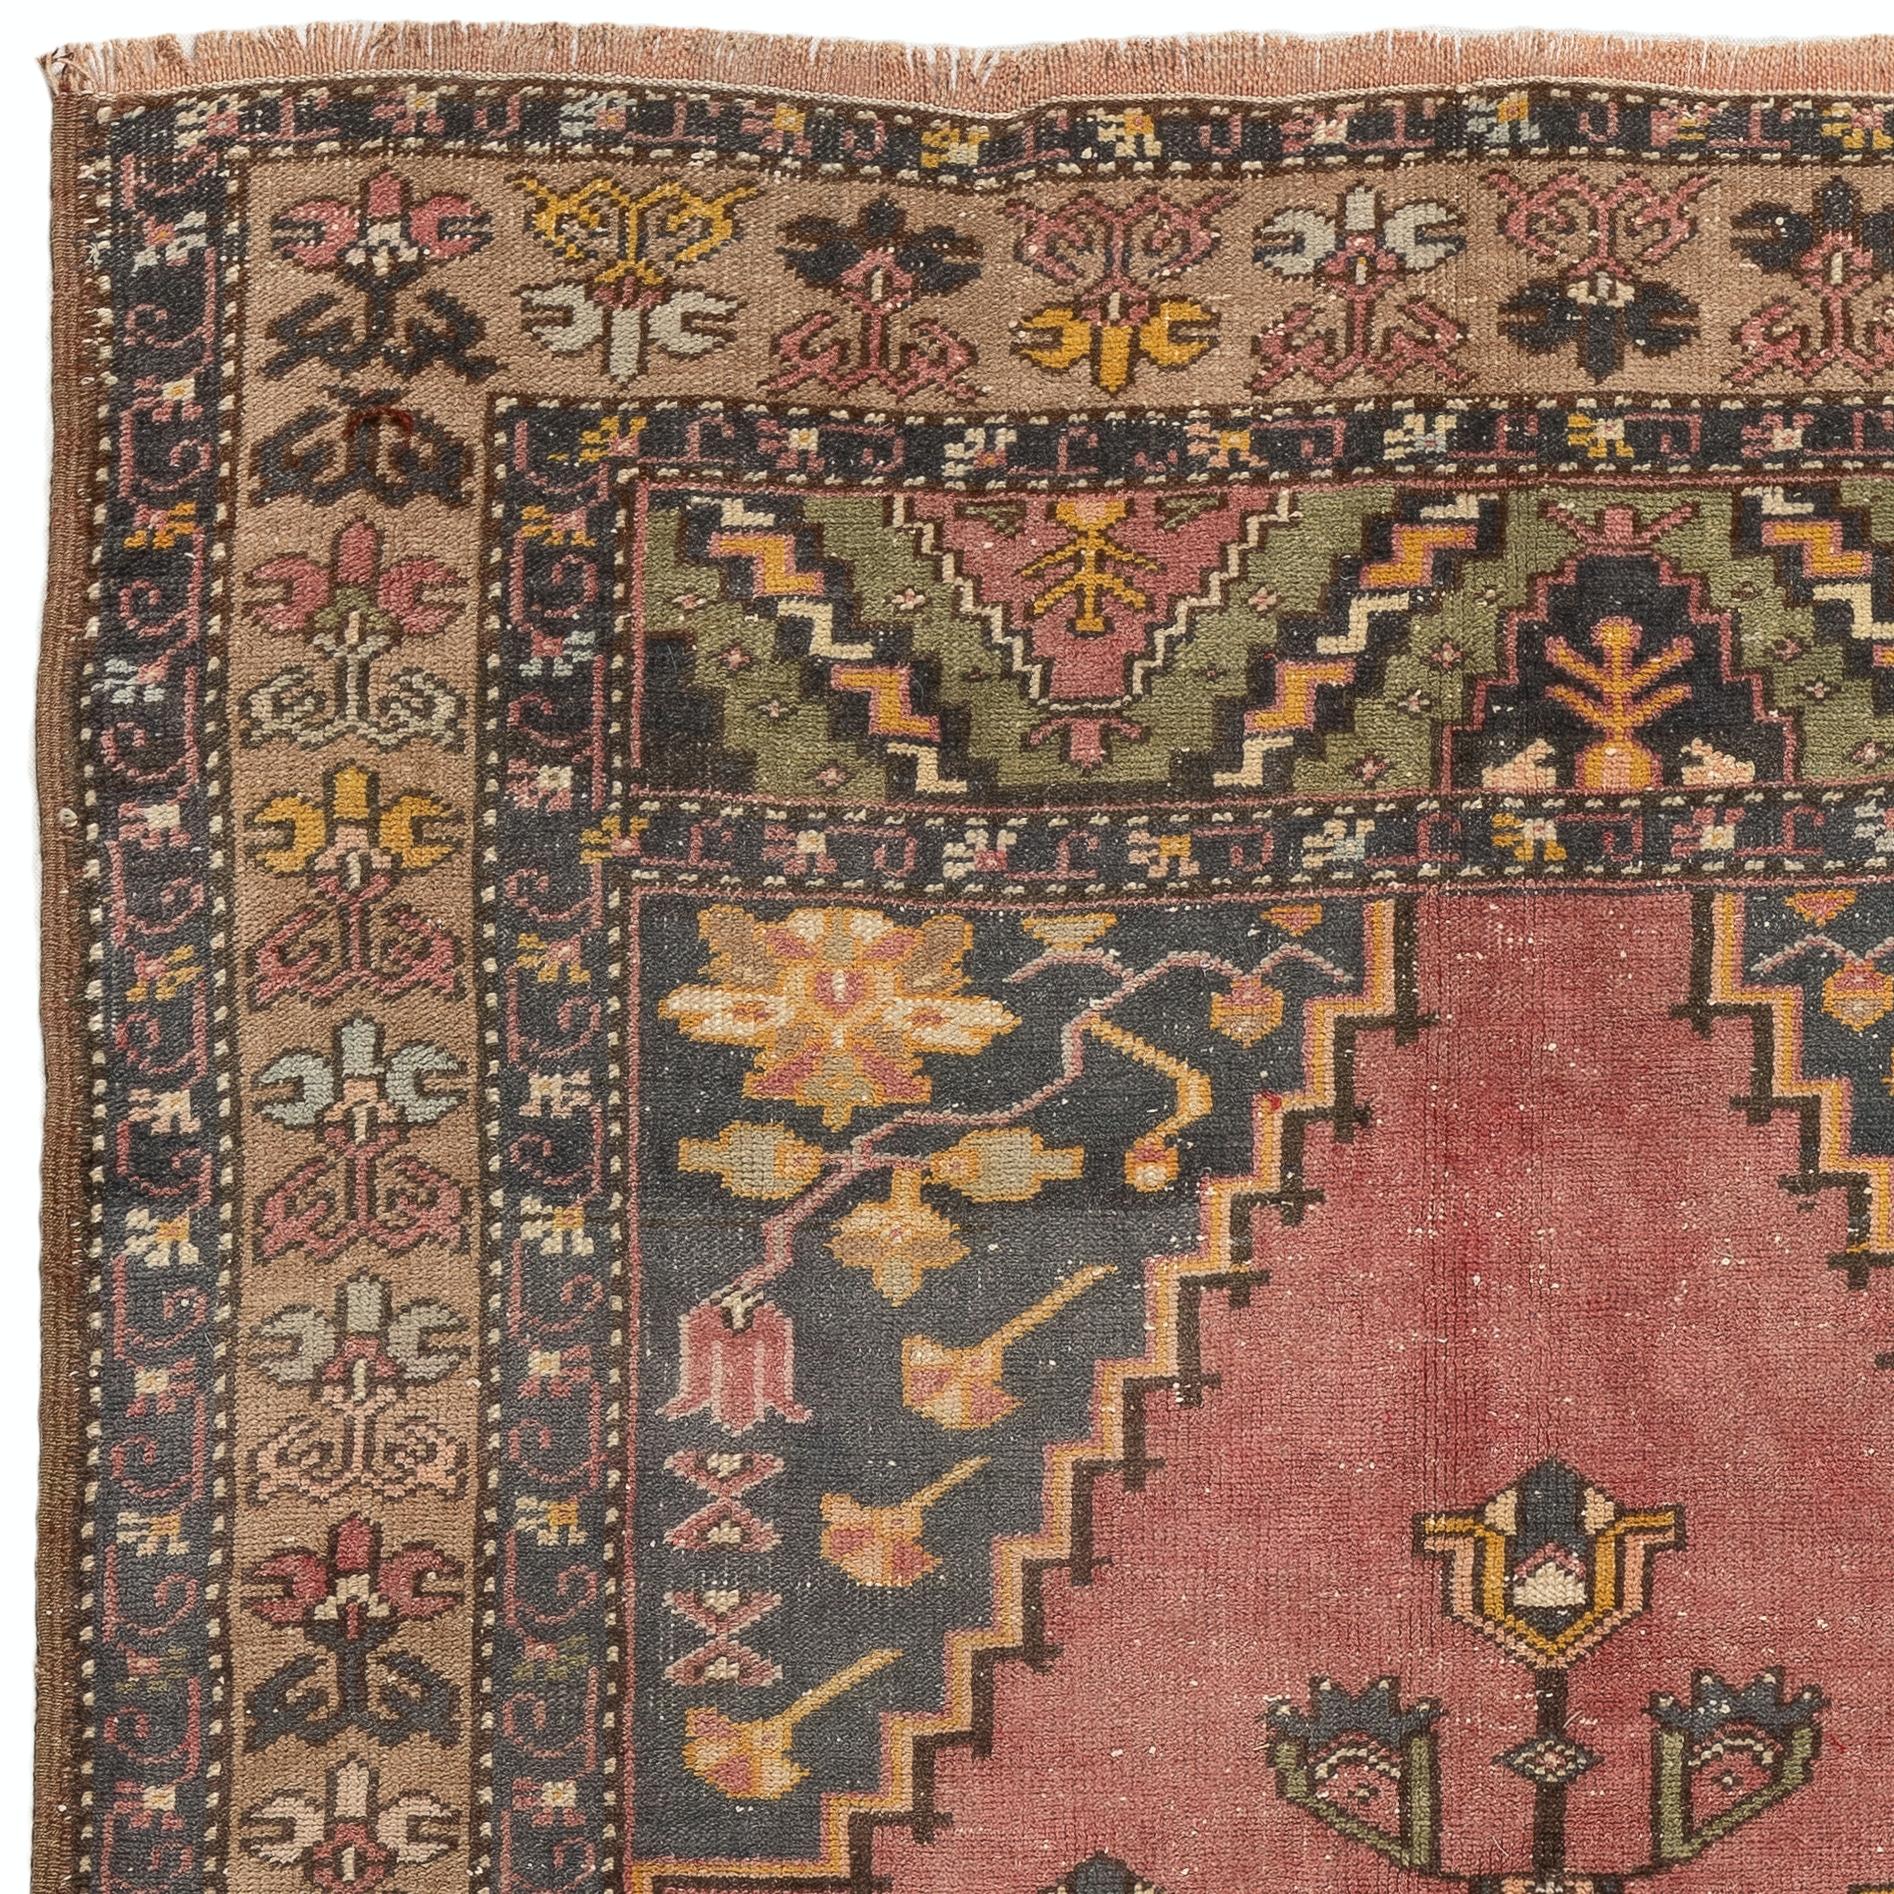 A vintage Turkish village rug with geometric medallion design. Measures: 4.5 x 8.4 ft
The rug is hand-knotted with natural sheep's wool, has soft medium pile, in good condition and sturdy. Its soft and warm color palette has a vibrancy to it that